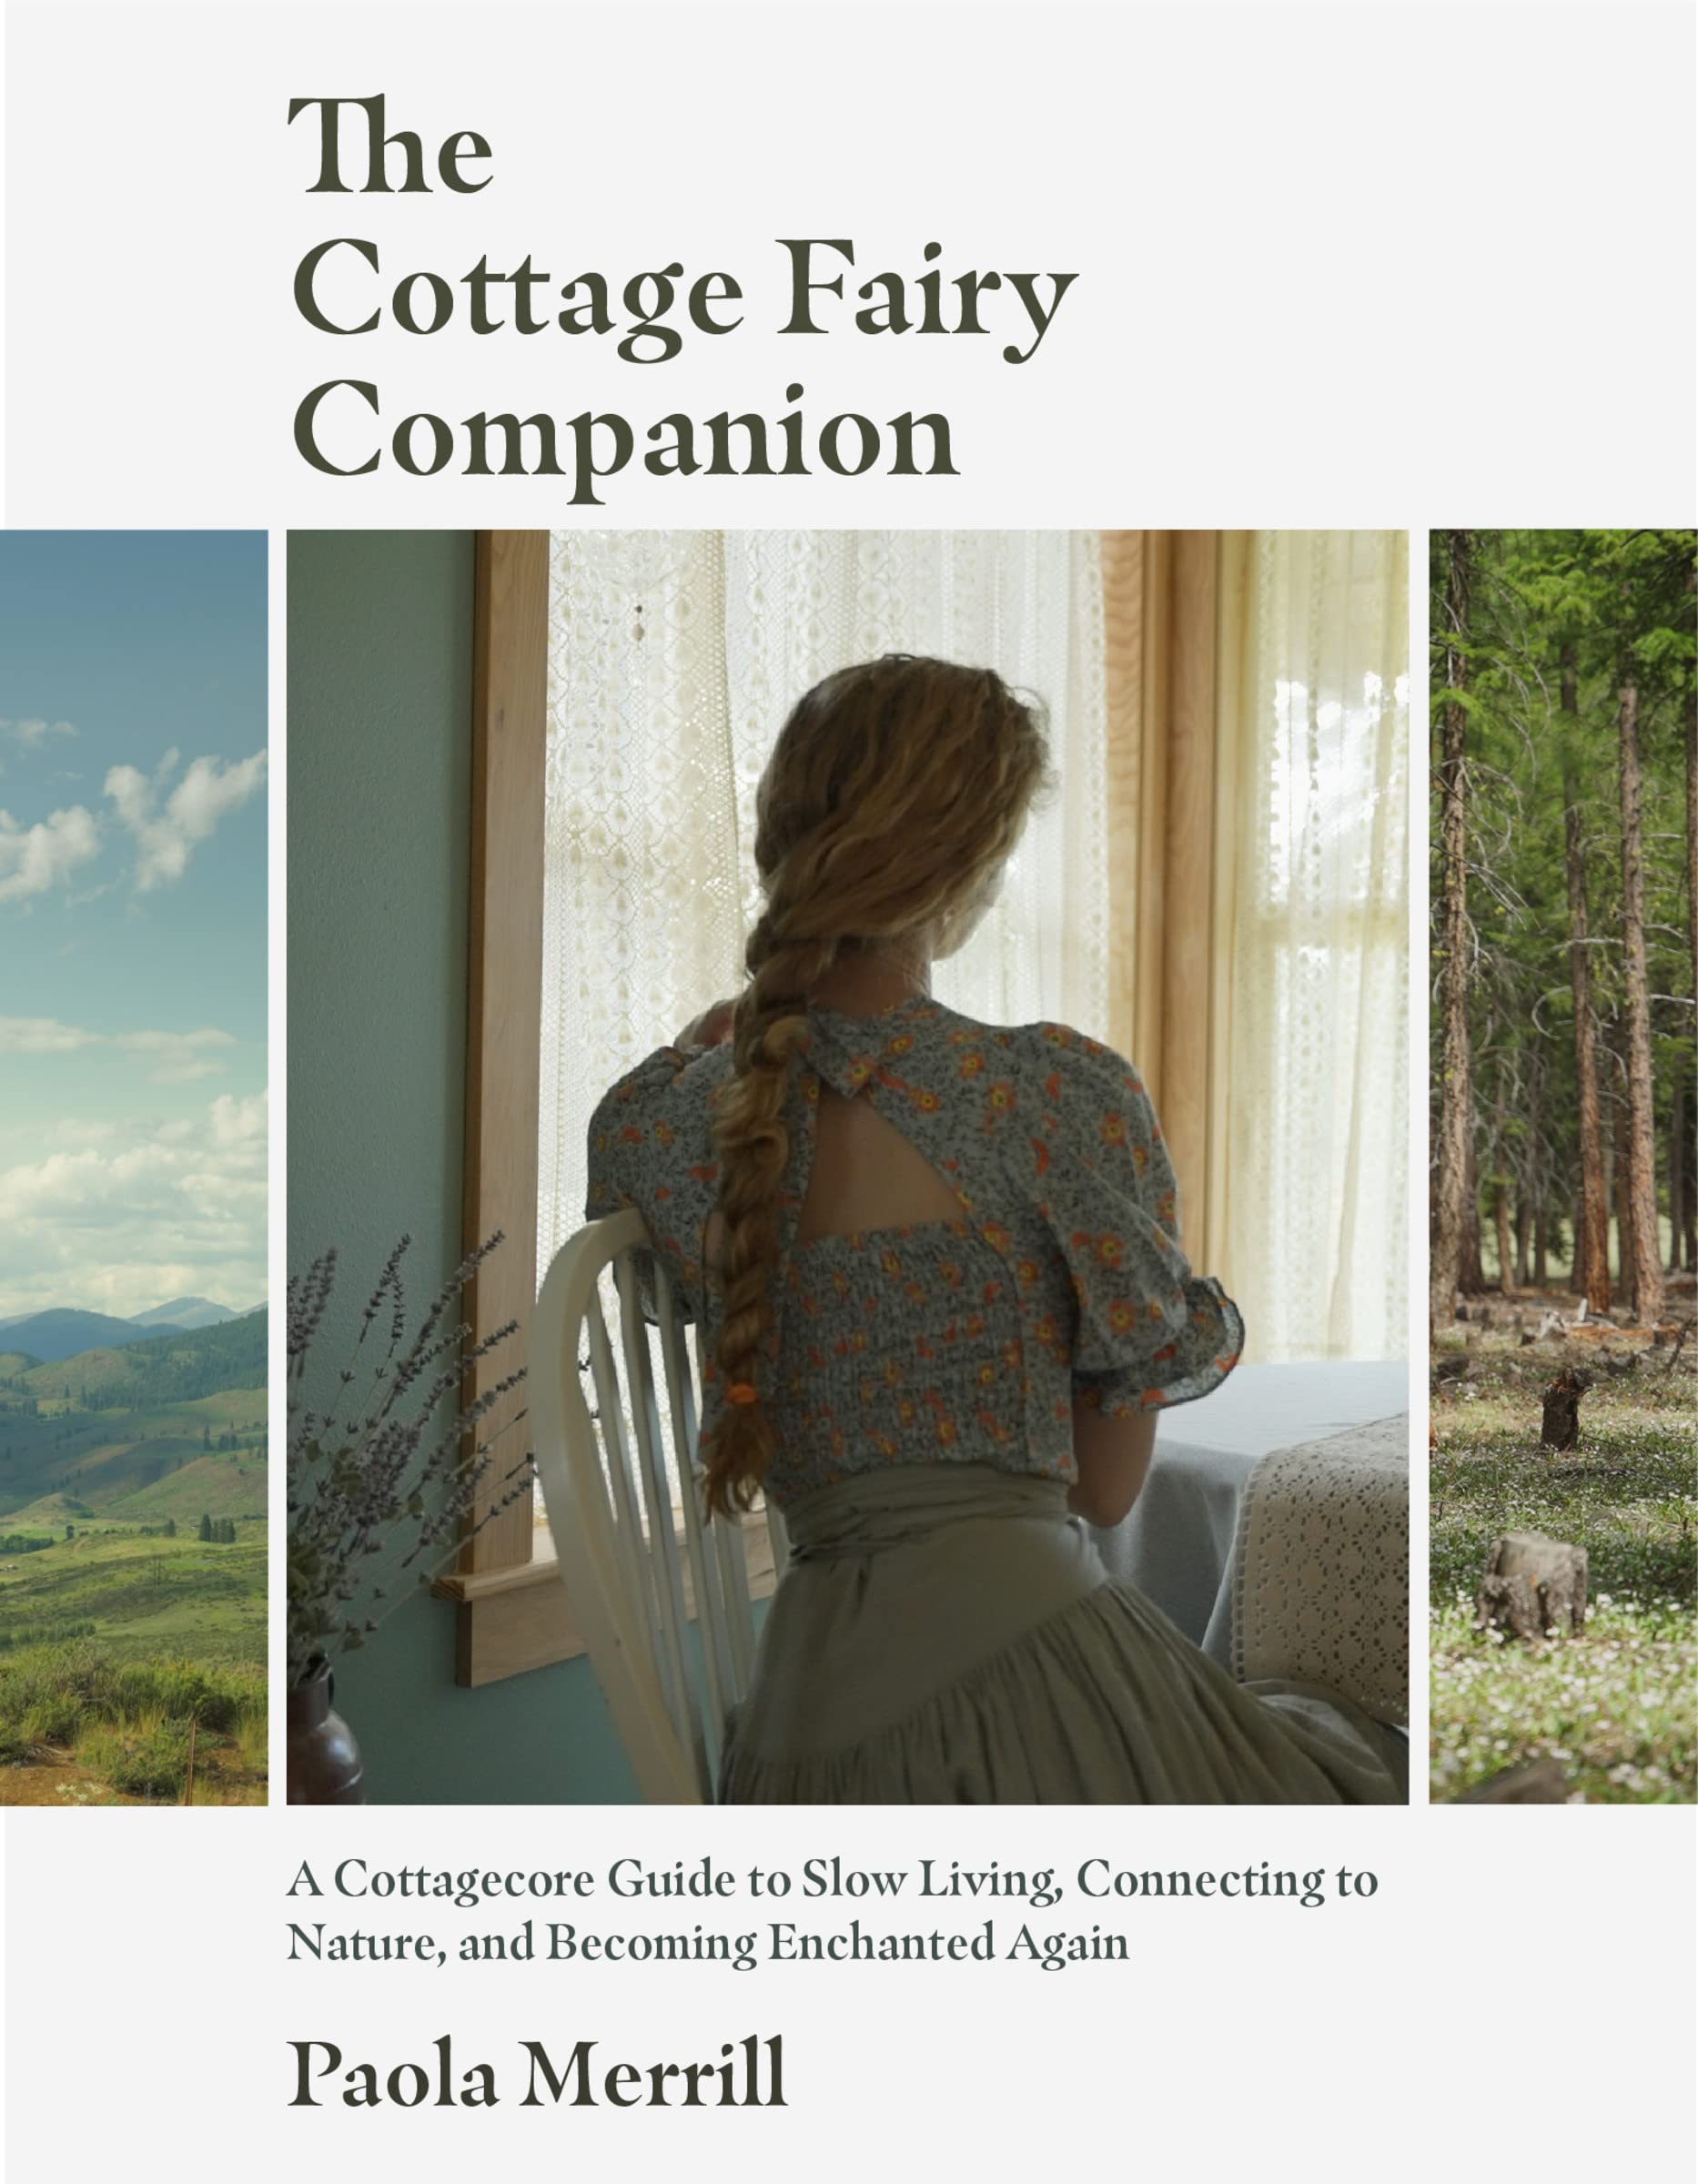 The Cottage Fairy Companion: A Cottagecore Guide to Slow Living, Connecting to Nature, and Becoming Enchanted Again (Mindful Living, Home Design fo (Paperback)